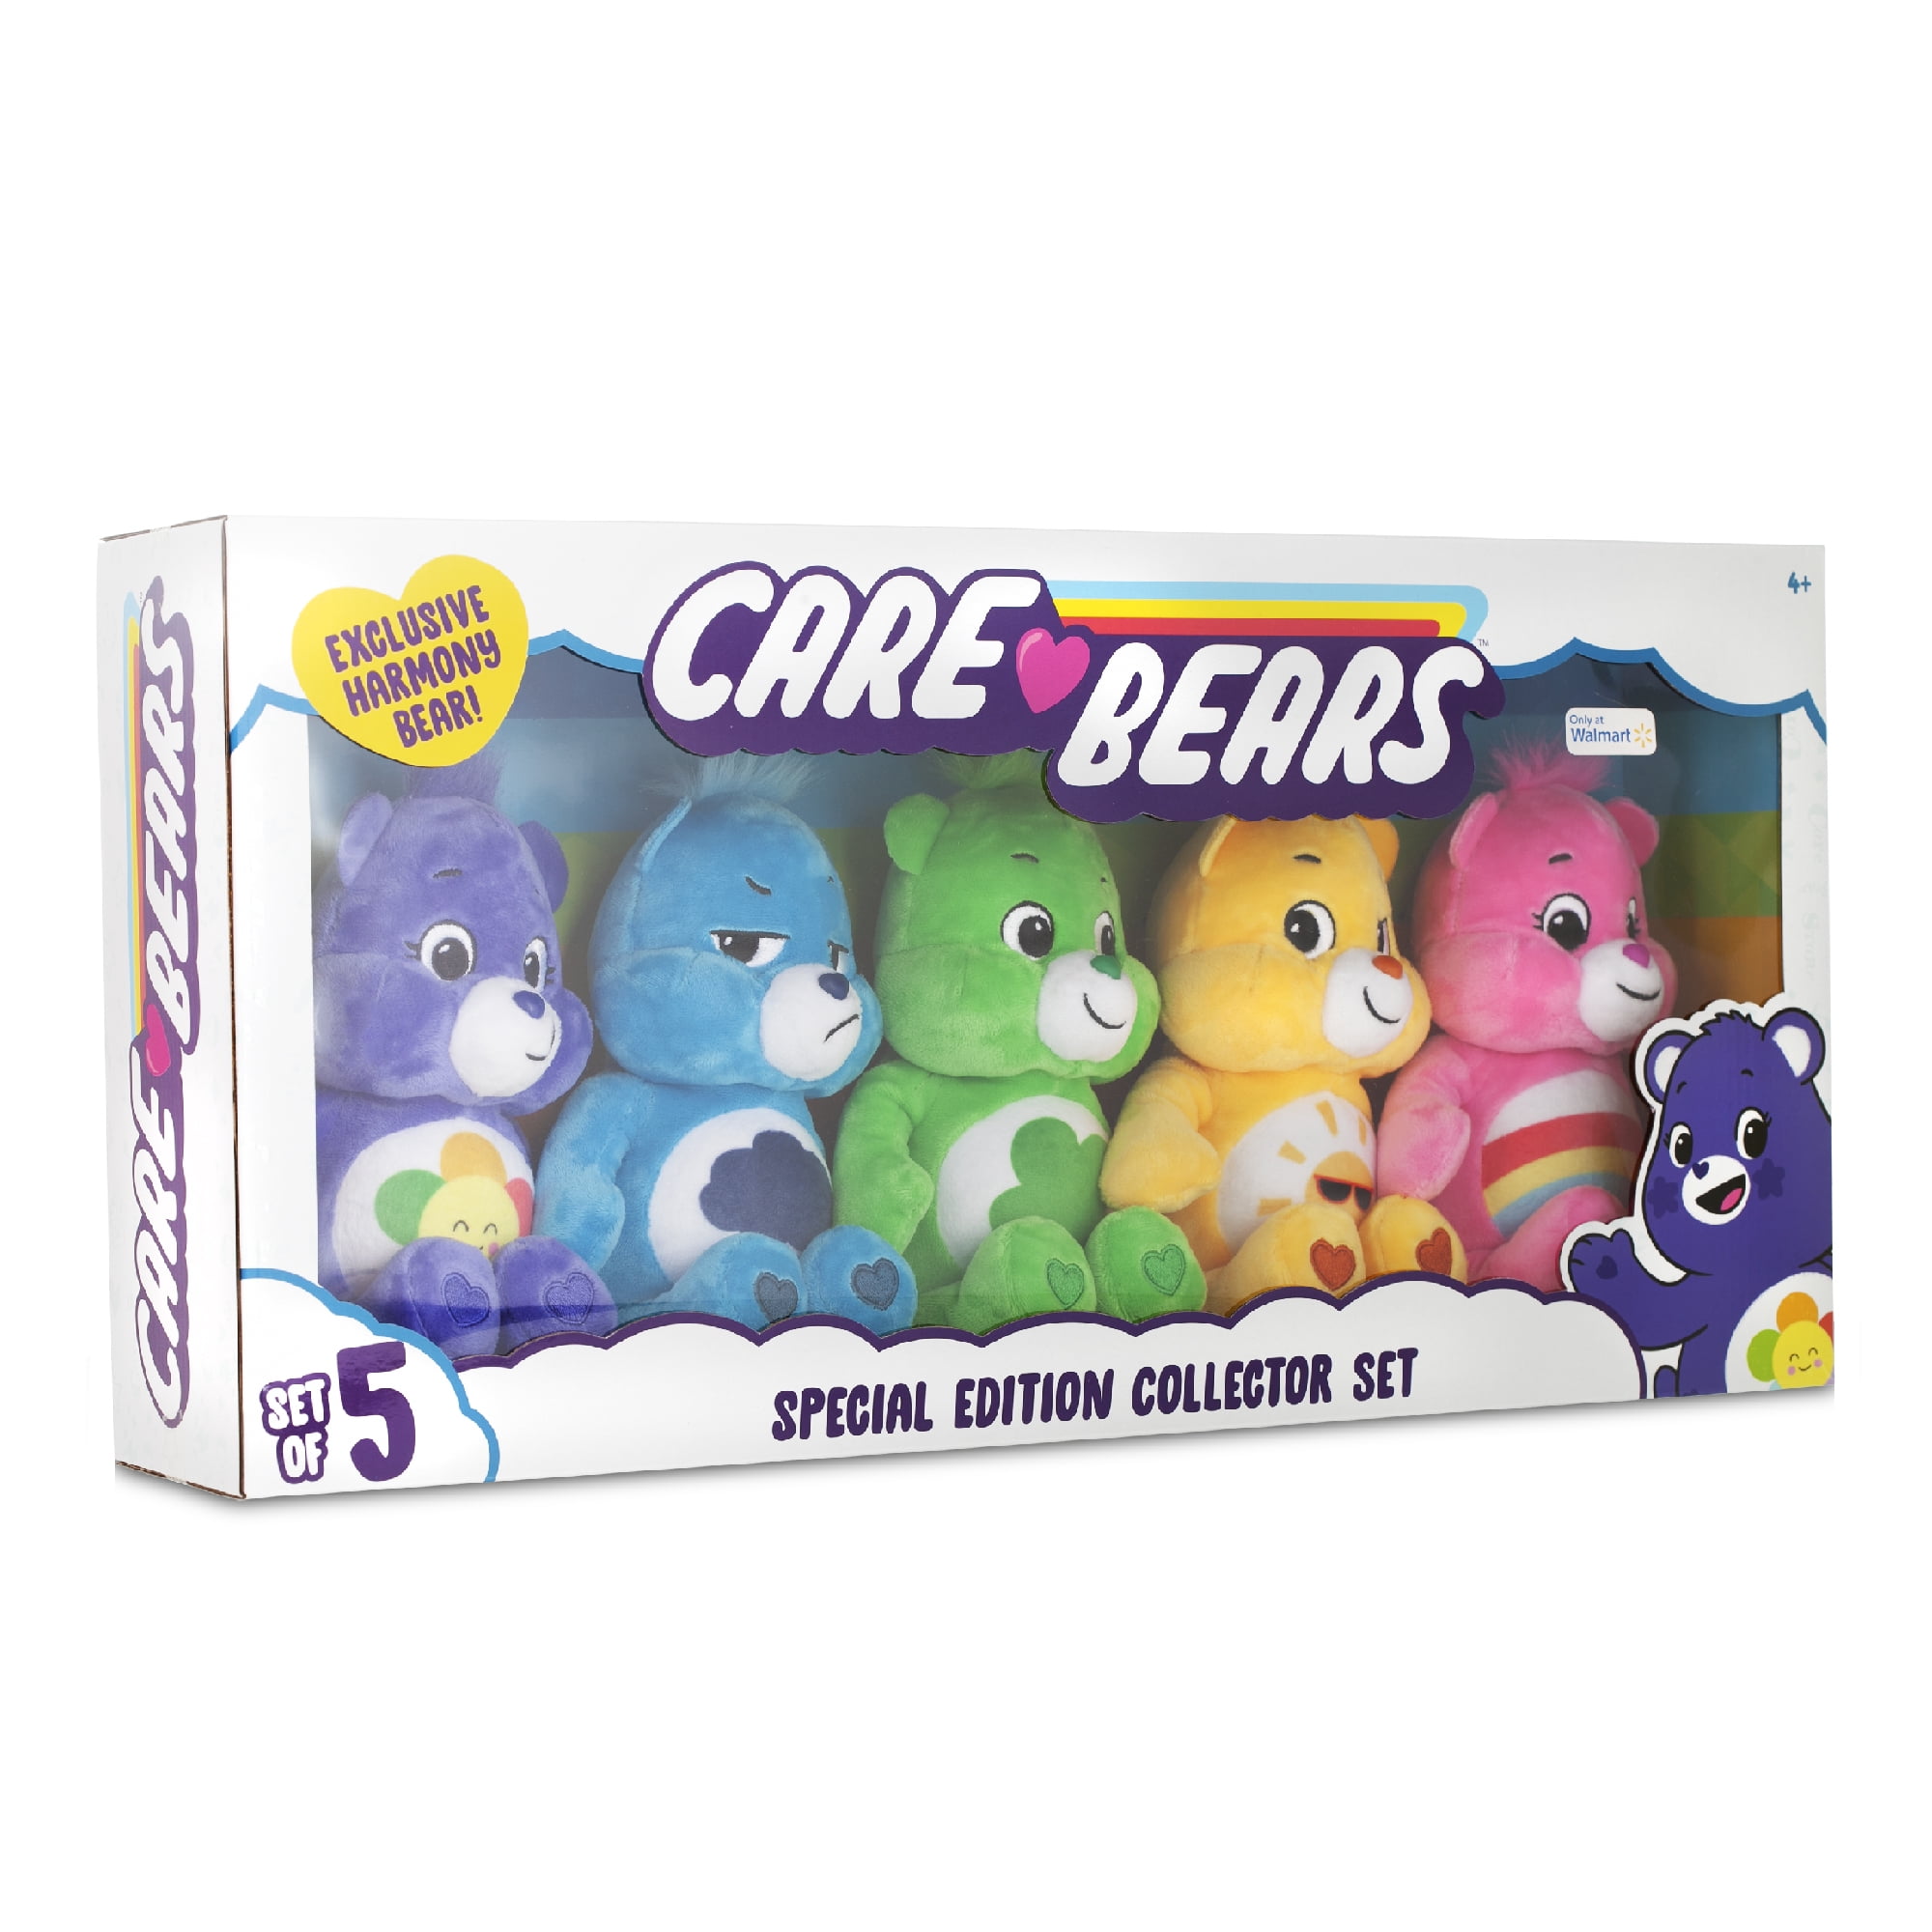 care bears collector set